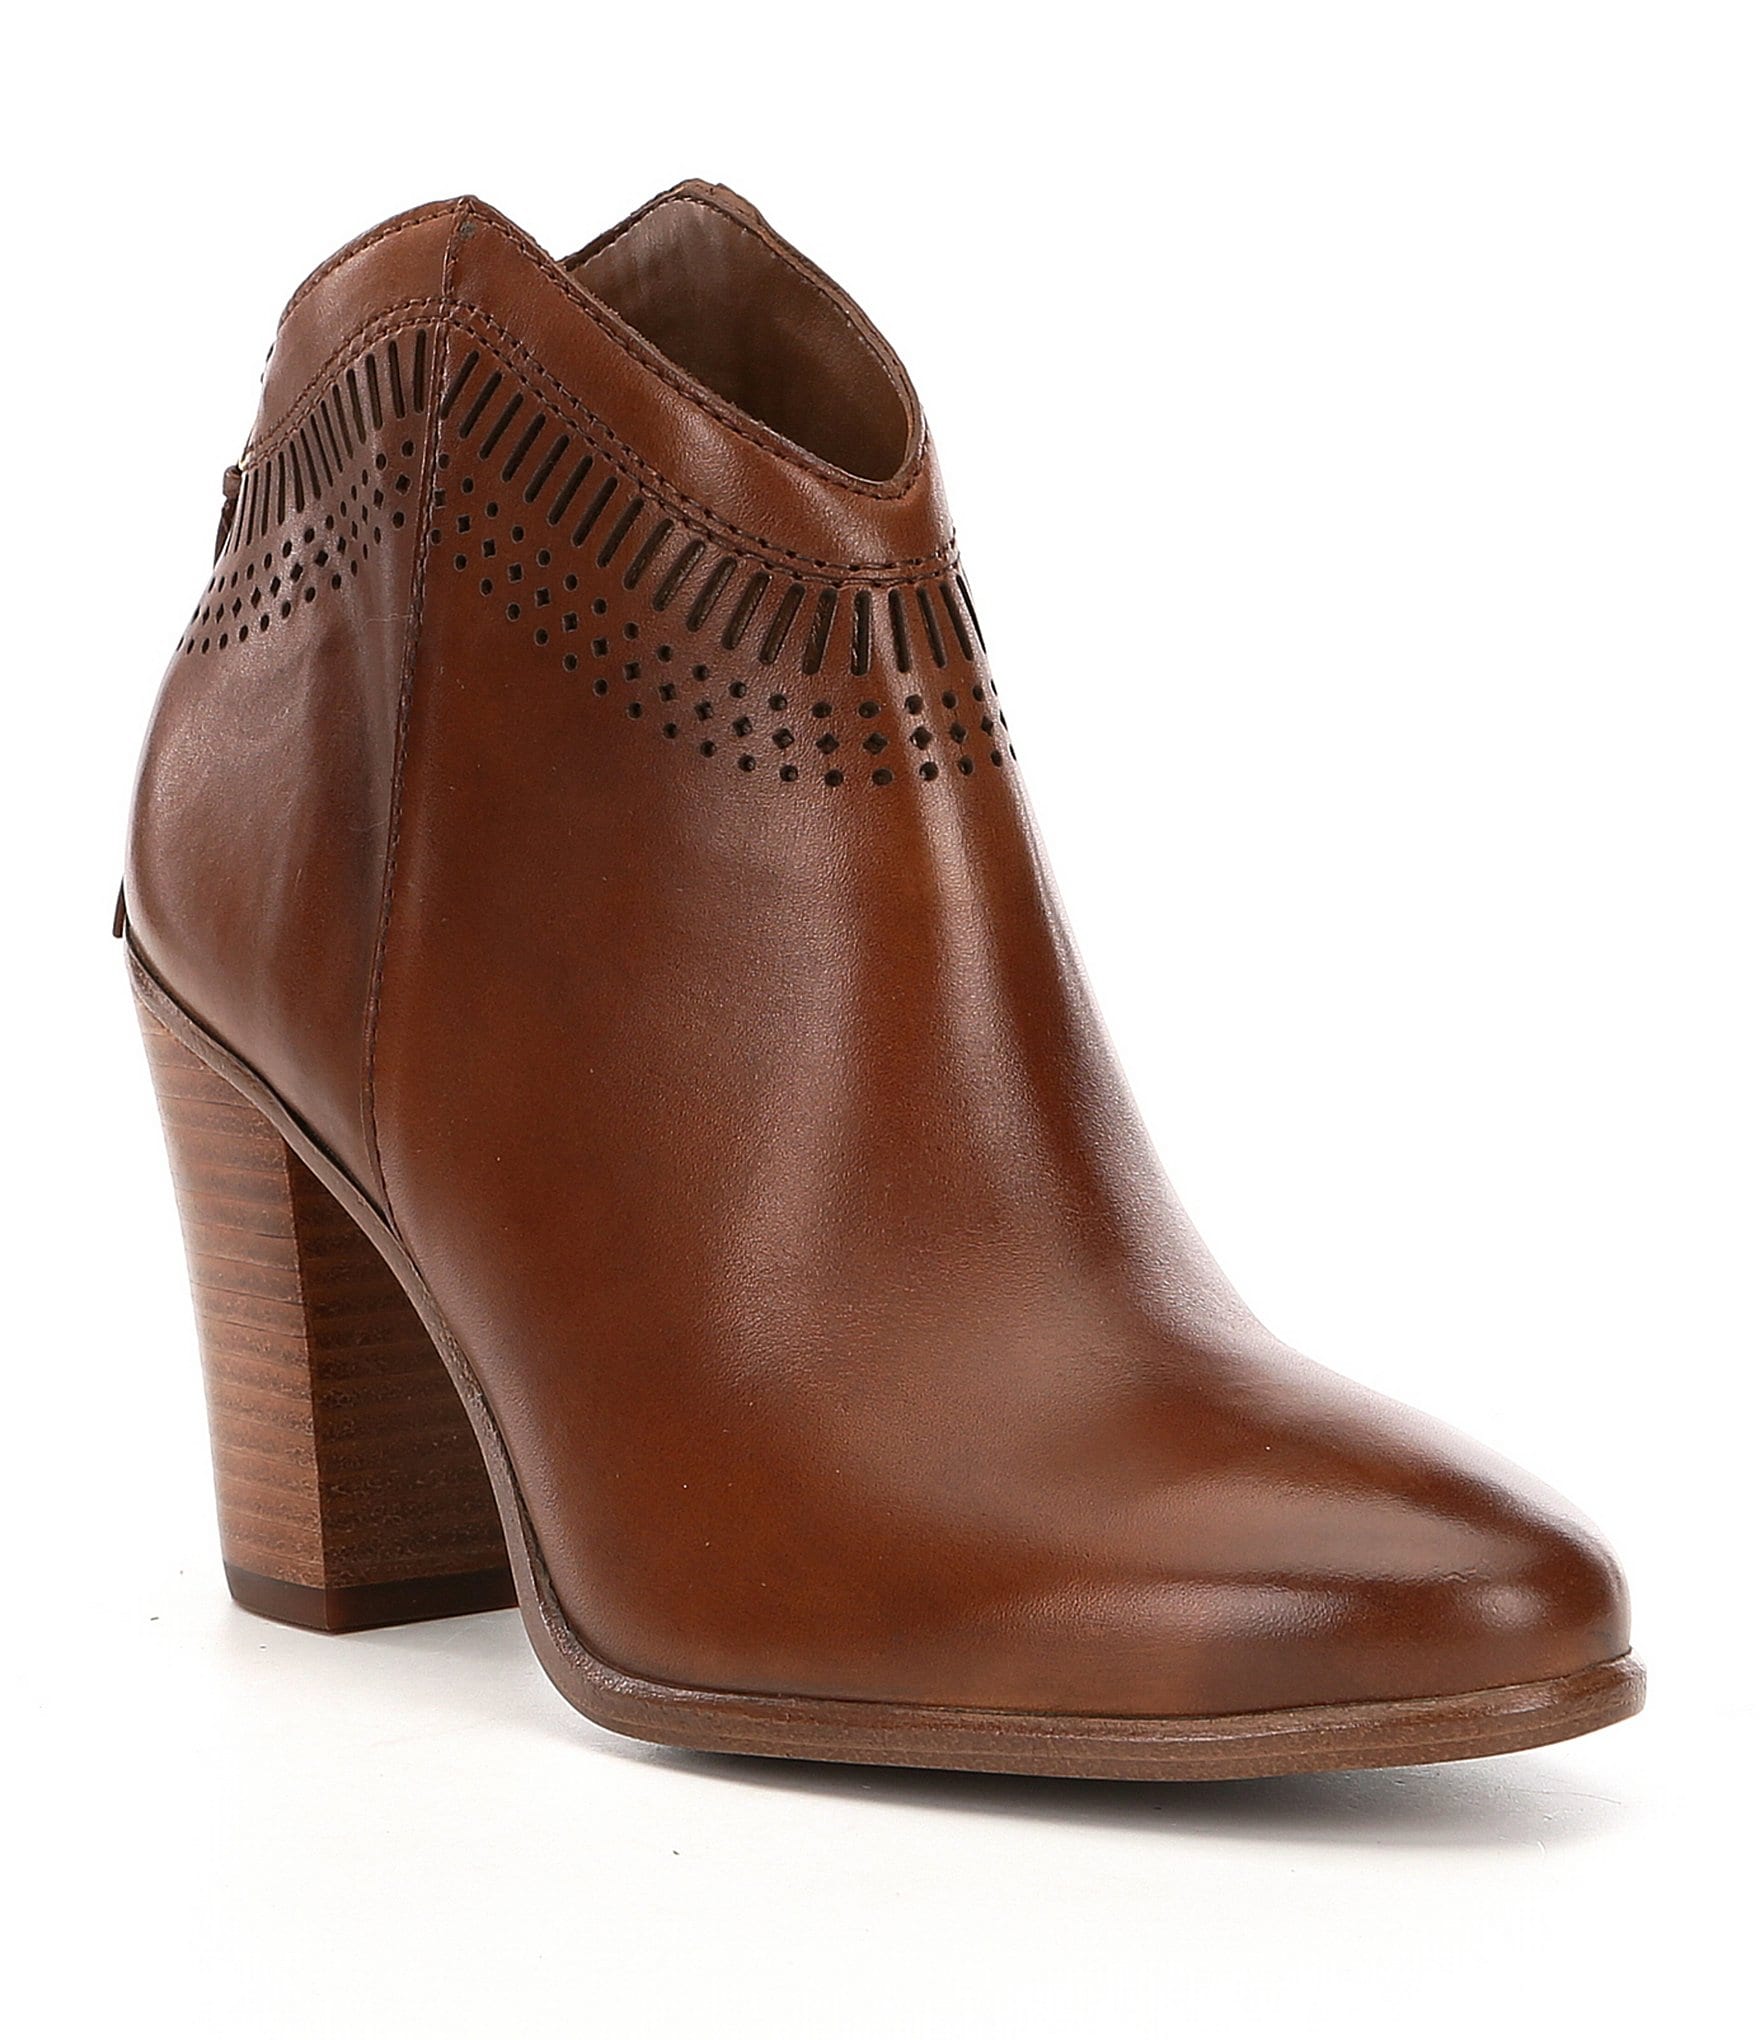 Vince Camuto Fetter Laser Cut Stacked Heel Leather Booties | Dillards